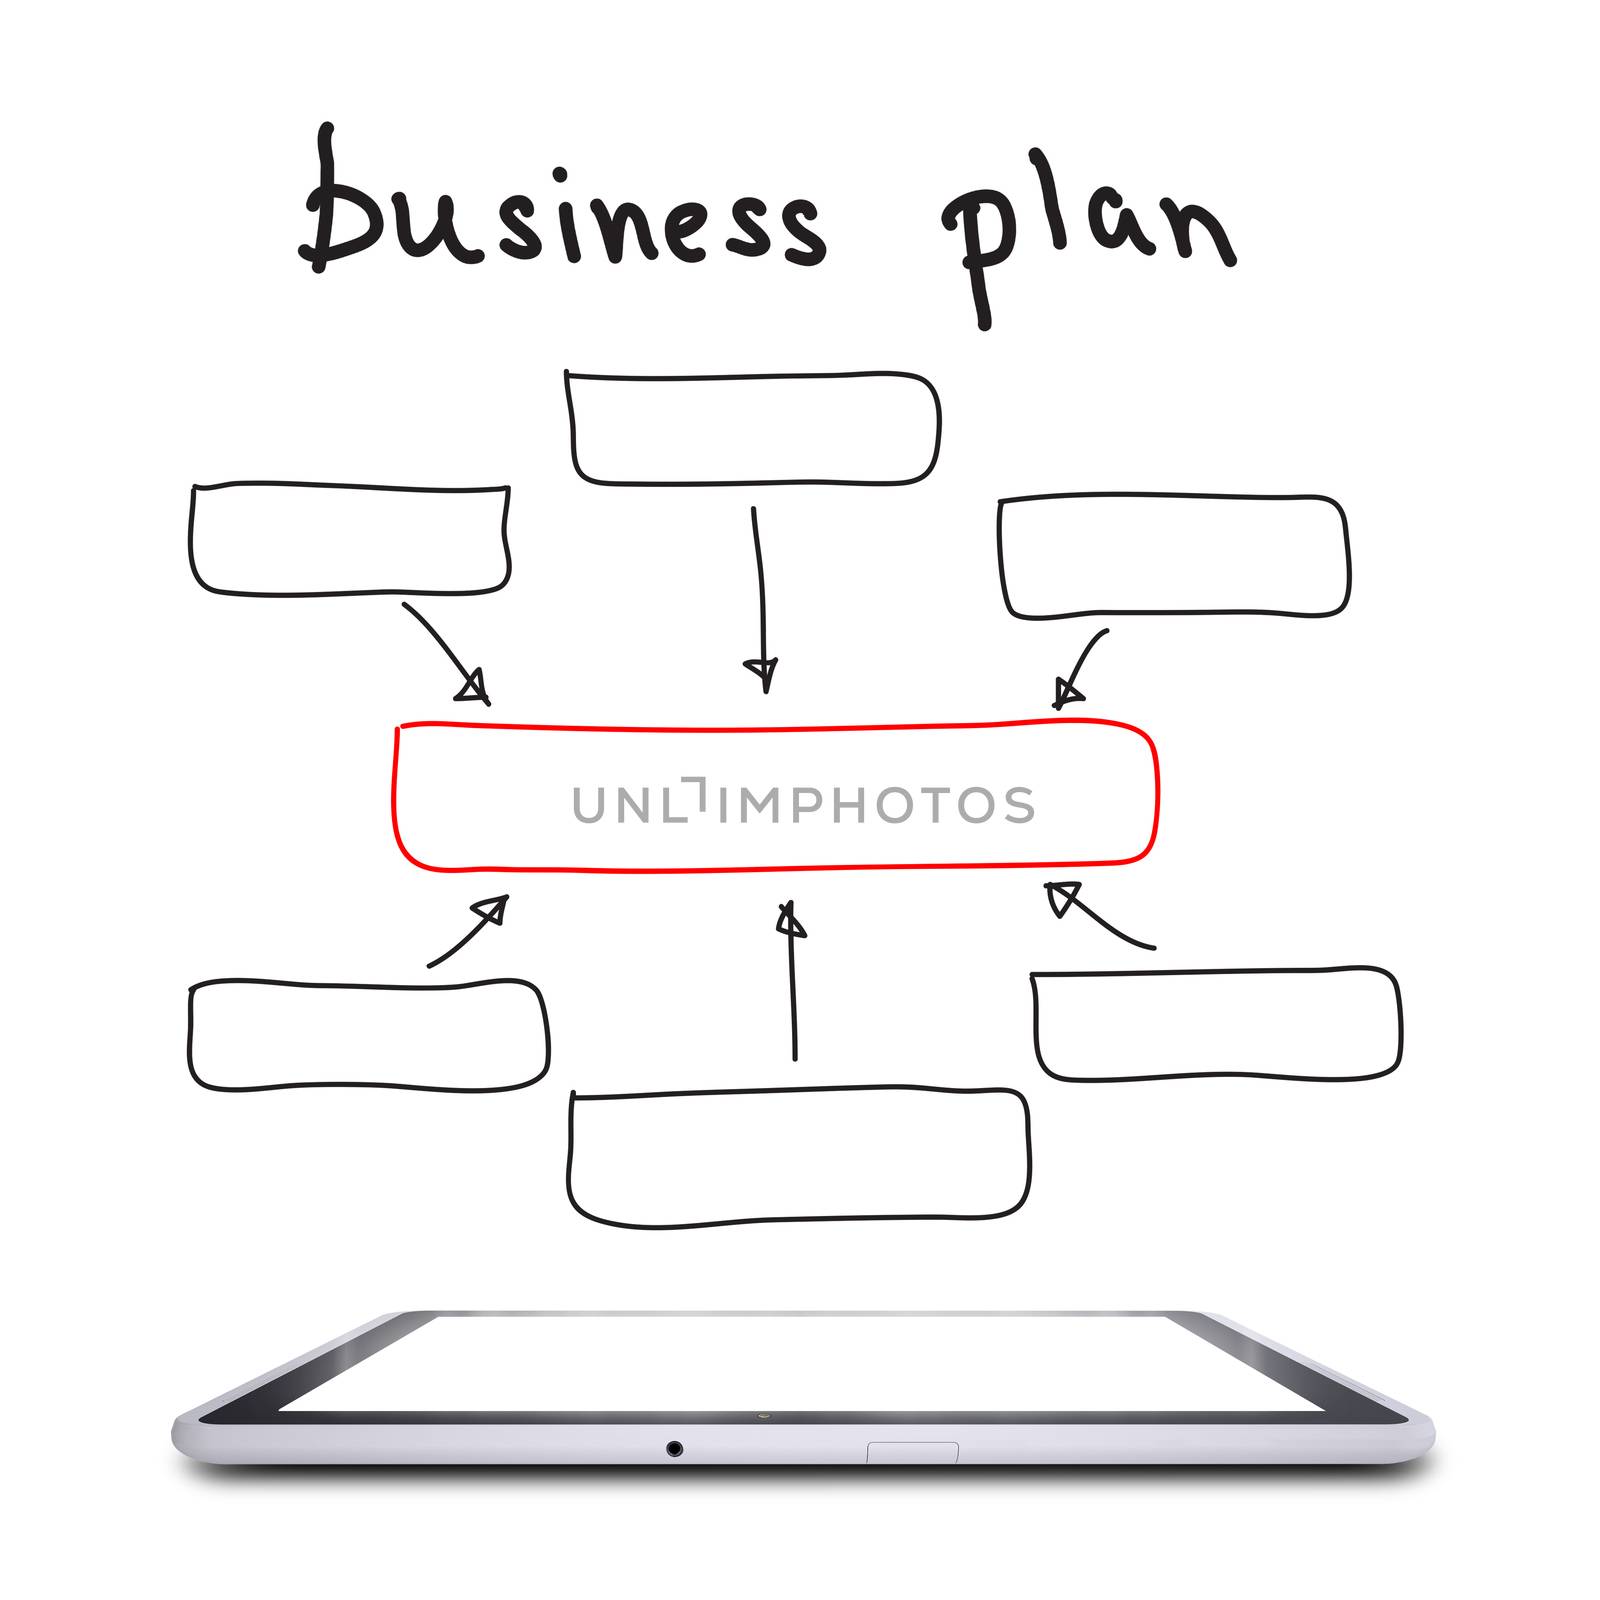 On the screen of the tablet is a block diagram of a business plan. Business concept